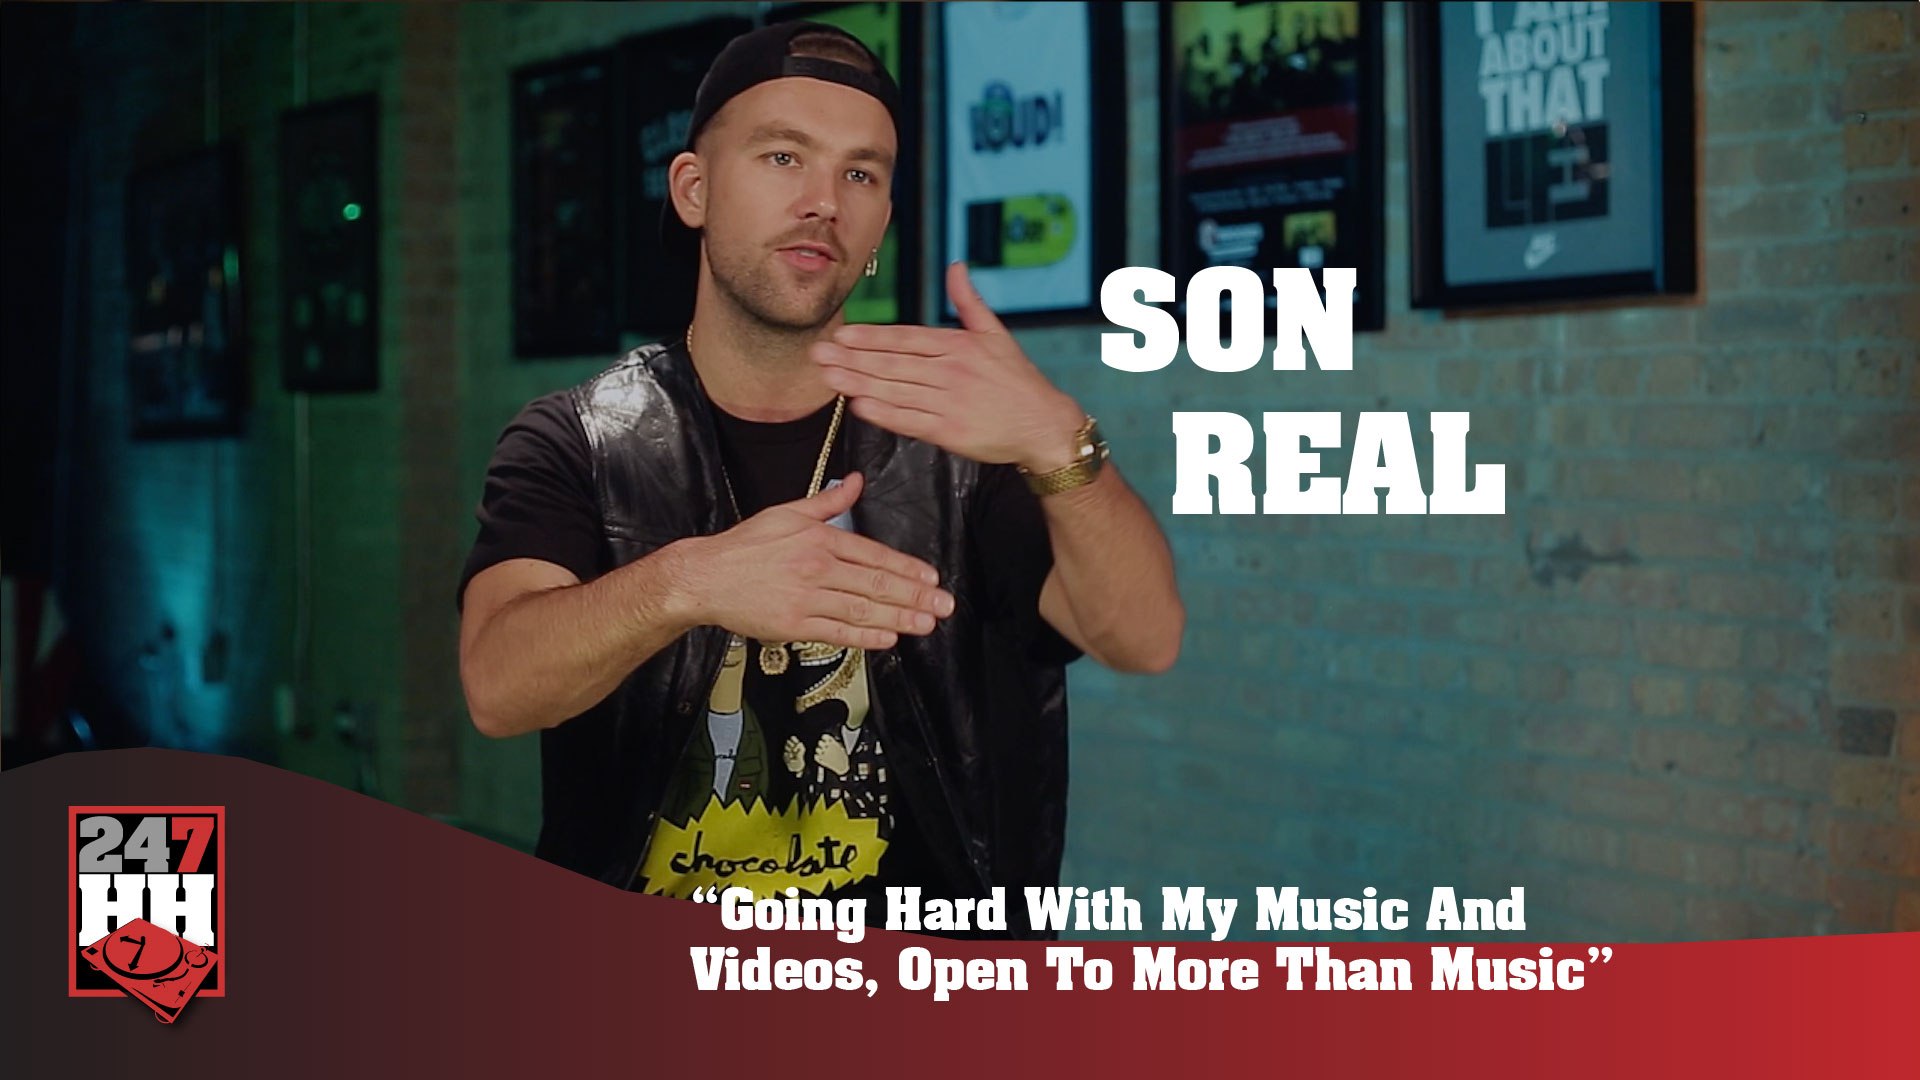 SonReal - Going Hard With My Music And Videos, Open To More Than Music (247HH Exclusive) (247HH Excl